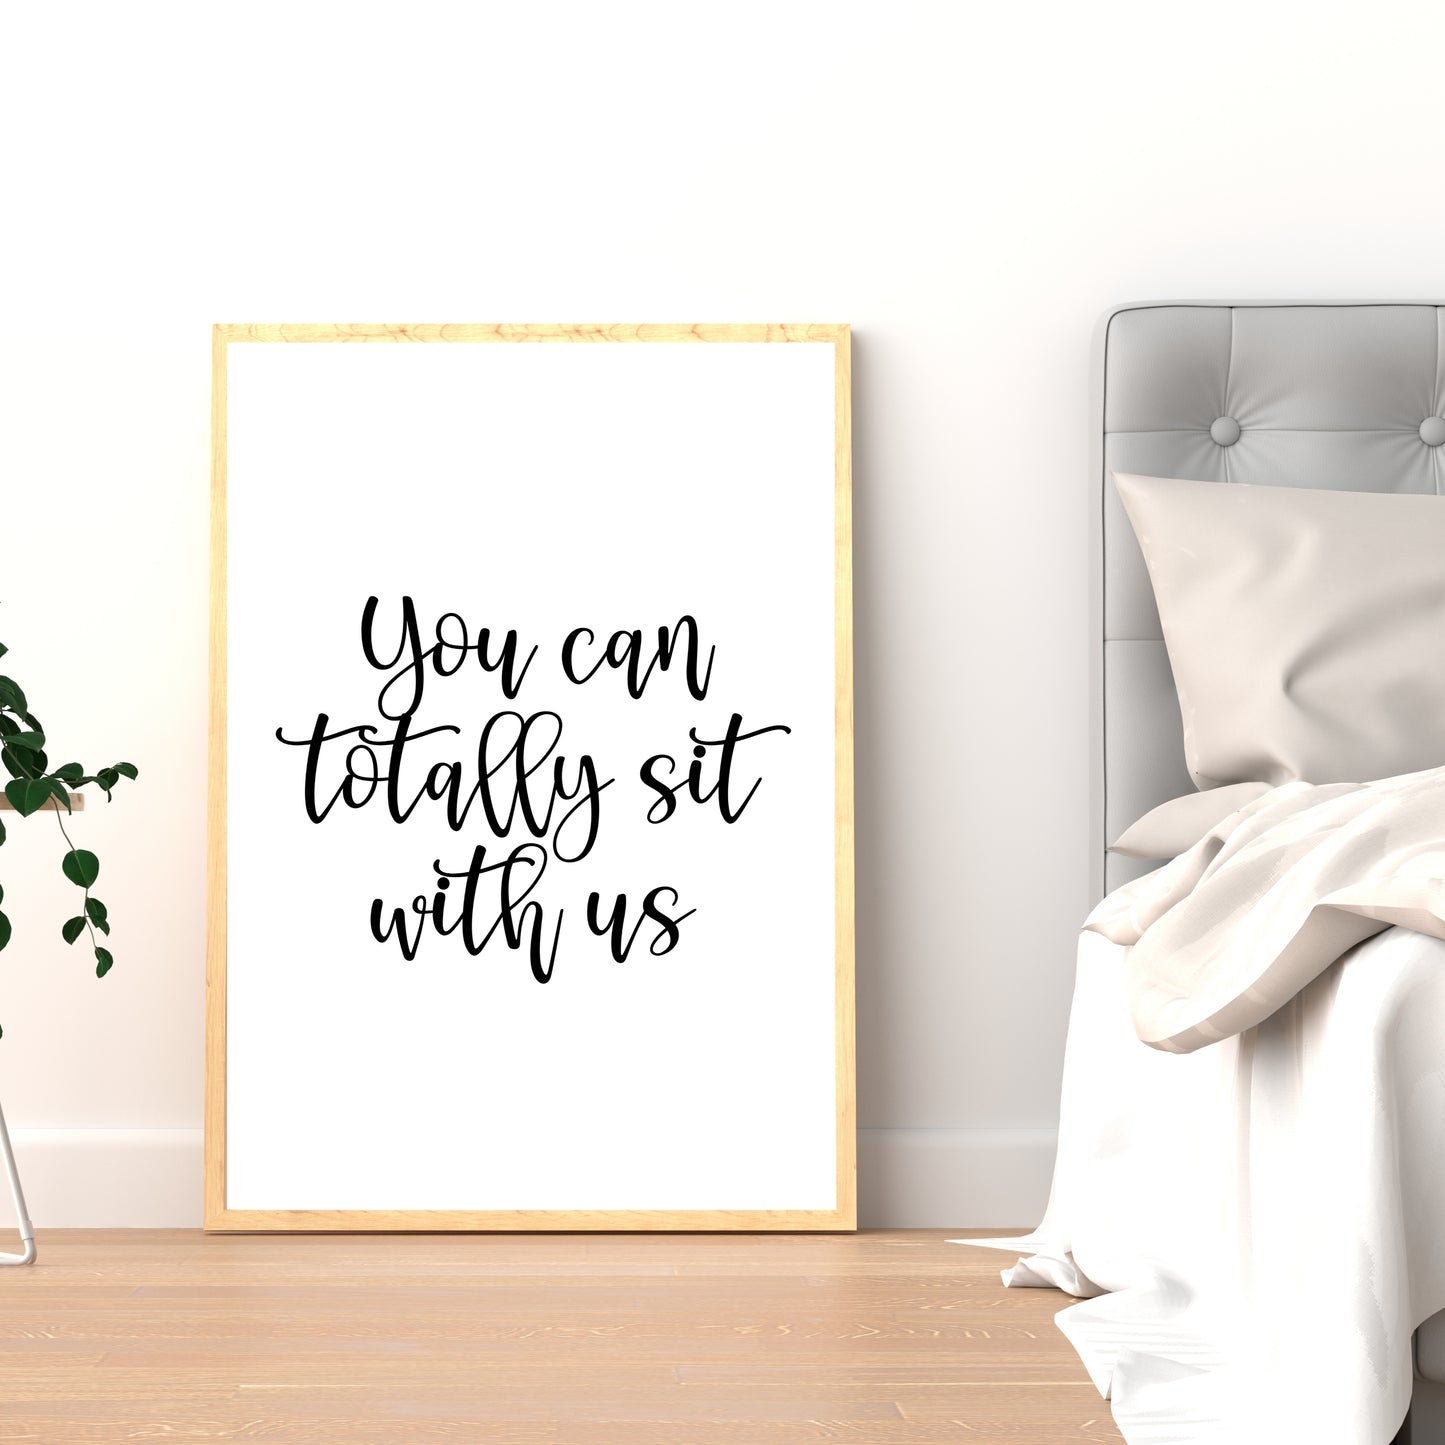 "You Can Totally Sit With Us" Movie Quote From 'Mean Girls,' Farmhouse Chic Printable Art